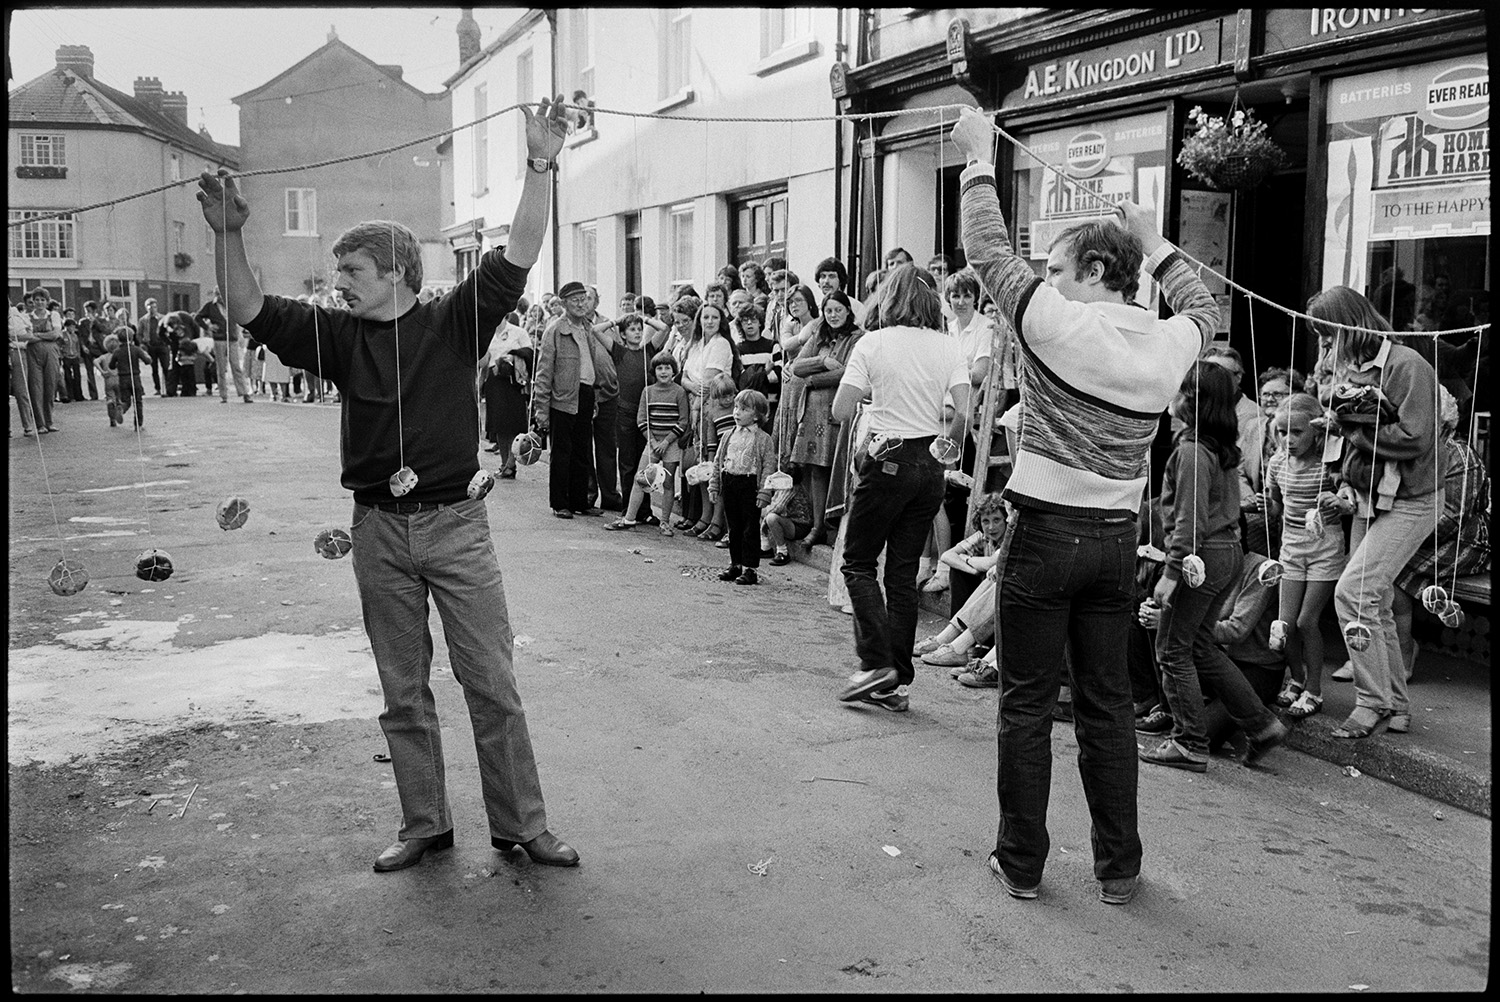 Sack race, eating buns on string in street. 
[Two men hoisting a string of buns across a street outside A E Kingdon Ironmongers shop in Chulmleigh, for children to eat in a competition at Chulmleigh Fair. People are gathered around to watch.]